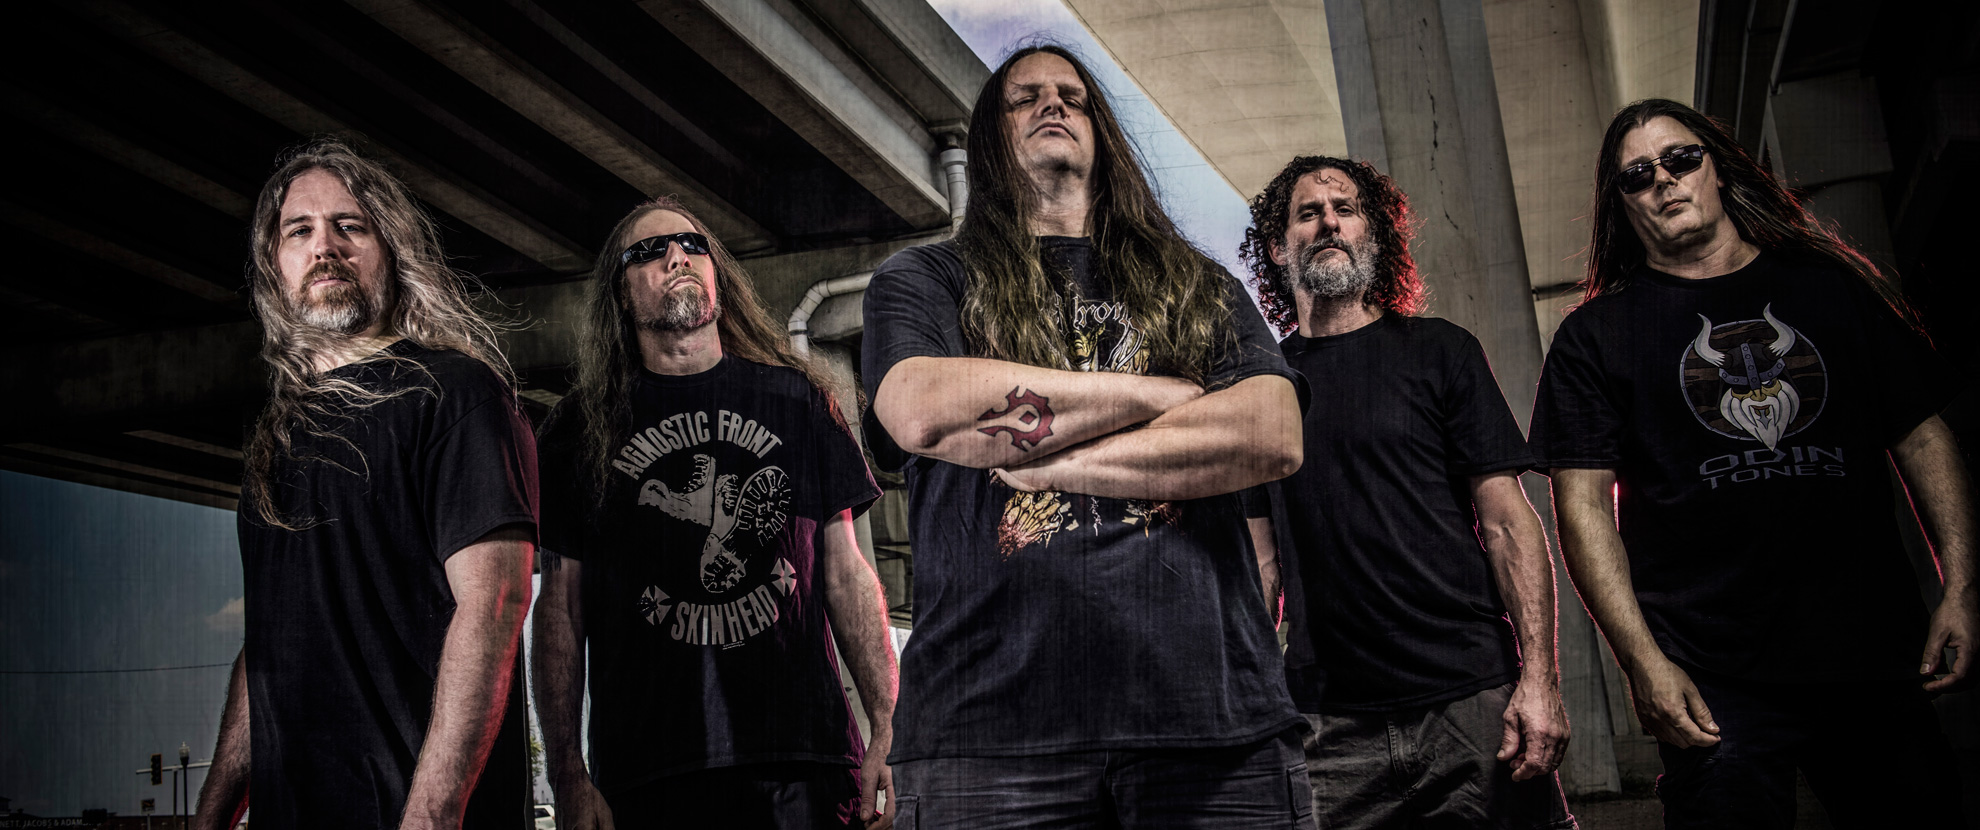 CANNIBAL CORPSE: American Death Metal Icons To Begin US Headlining Tour With Hate Eternal And Harm's Way Next Week